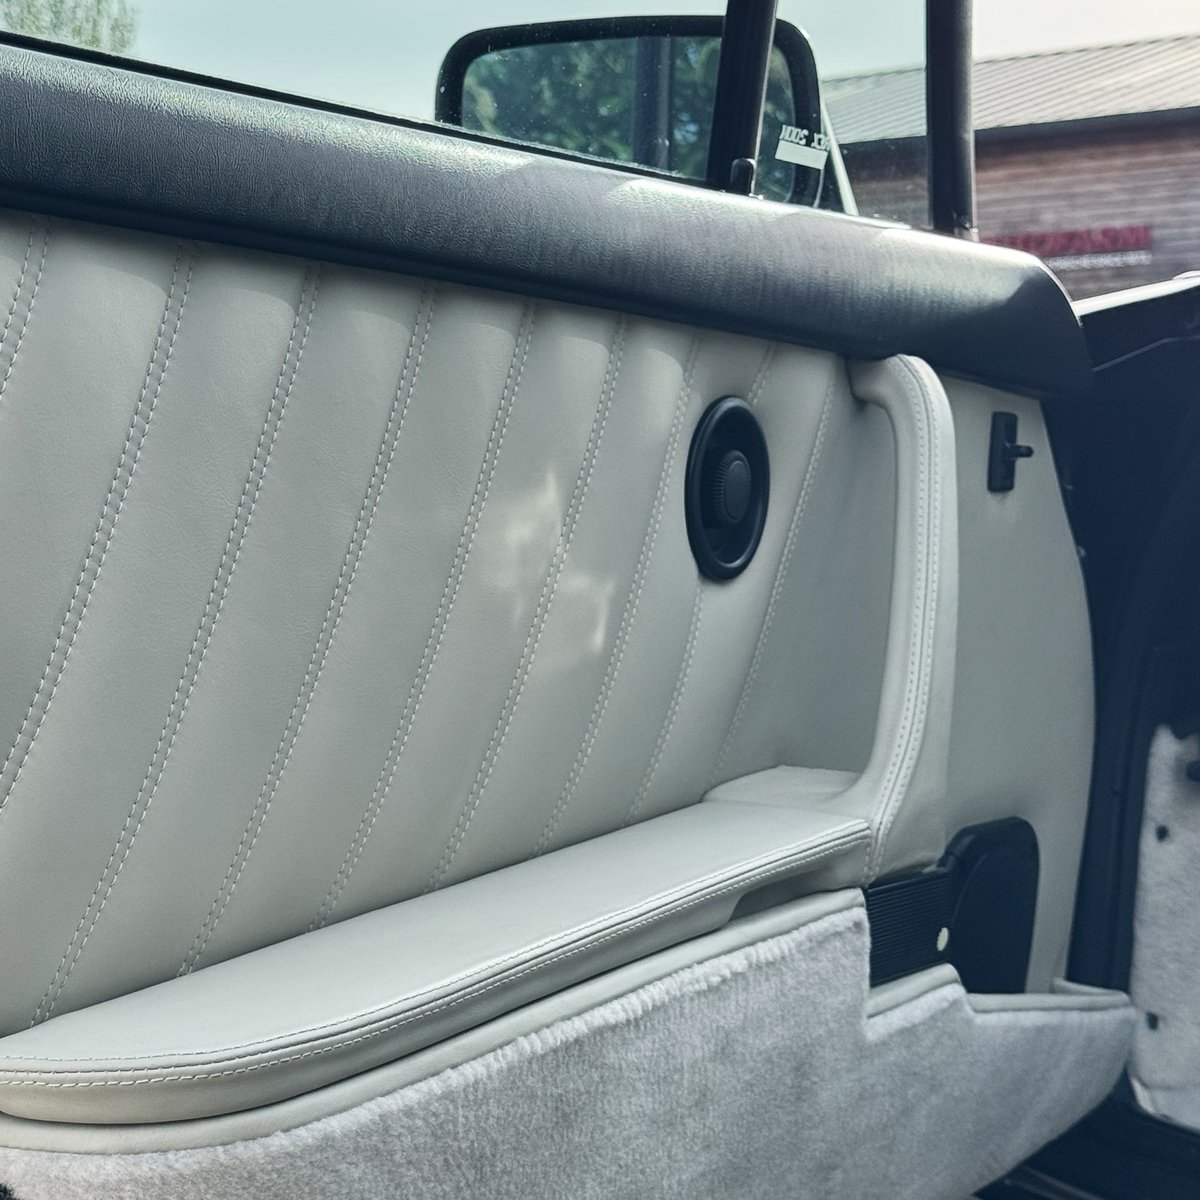 Want to know the ingredients to create serious Impact? Take a raw 86' 915 gear boxed, 3.2 Carrera. Add a visit to Autofarm. Whisk up a powerful 3.5 conversion. Sprinkle some love, updated brakes & suspension. A full linen interior retrim. Then just a add right foot & a big smile.